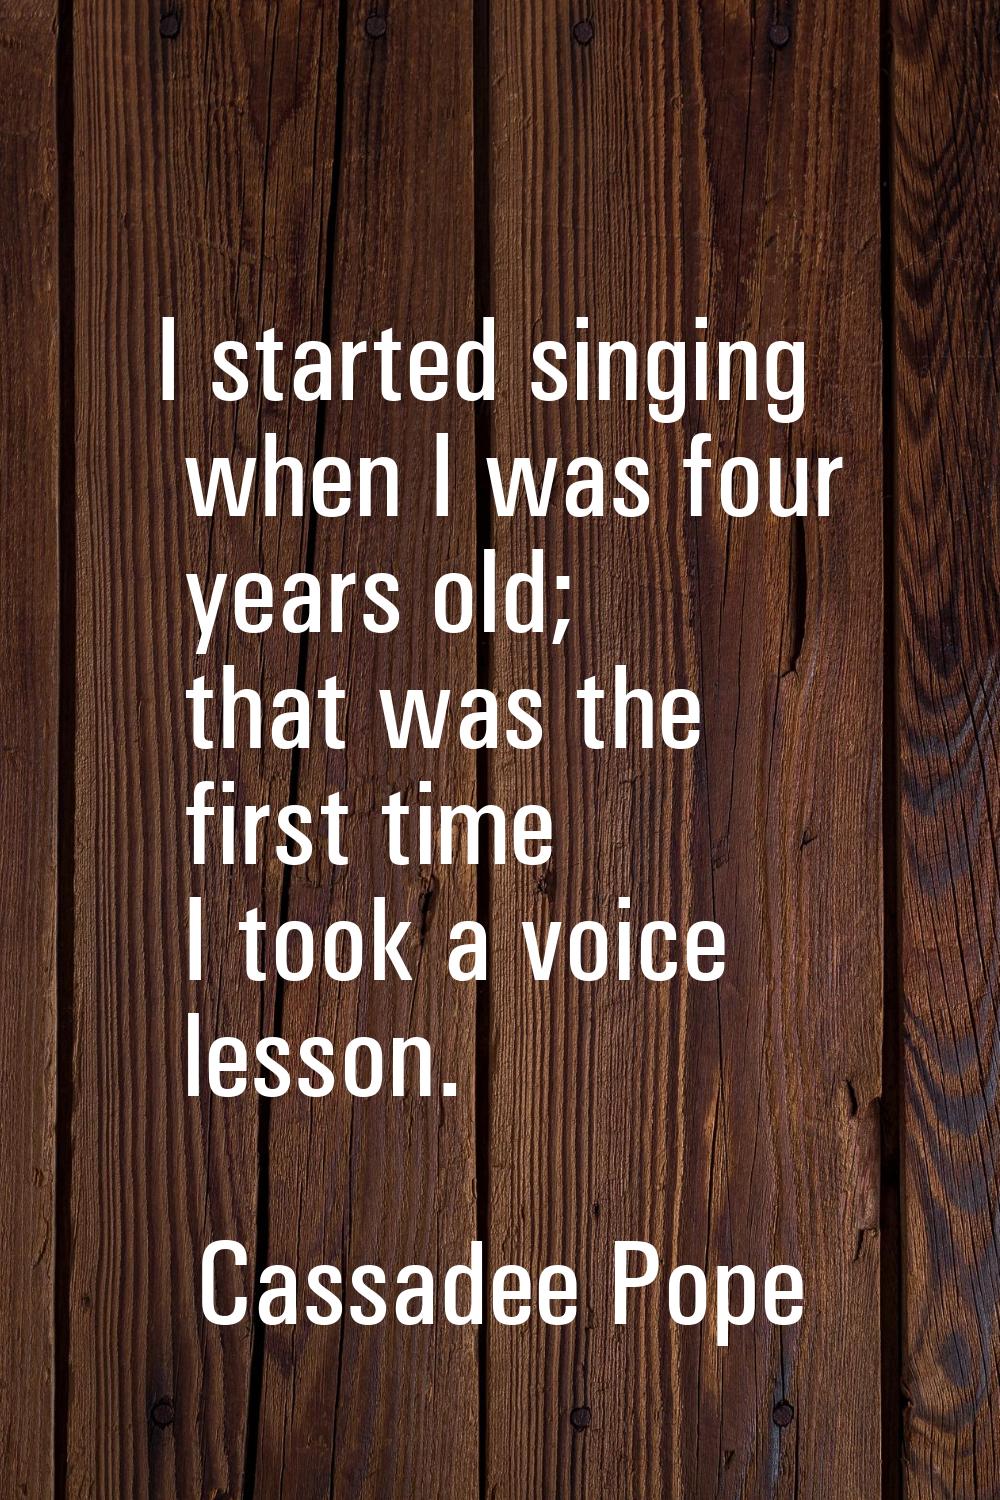 I started singing when I was four years old; that was the first time I took a voice lesson.